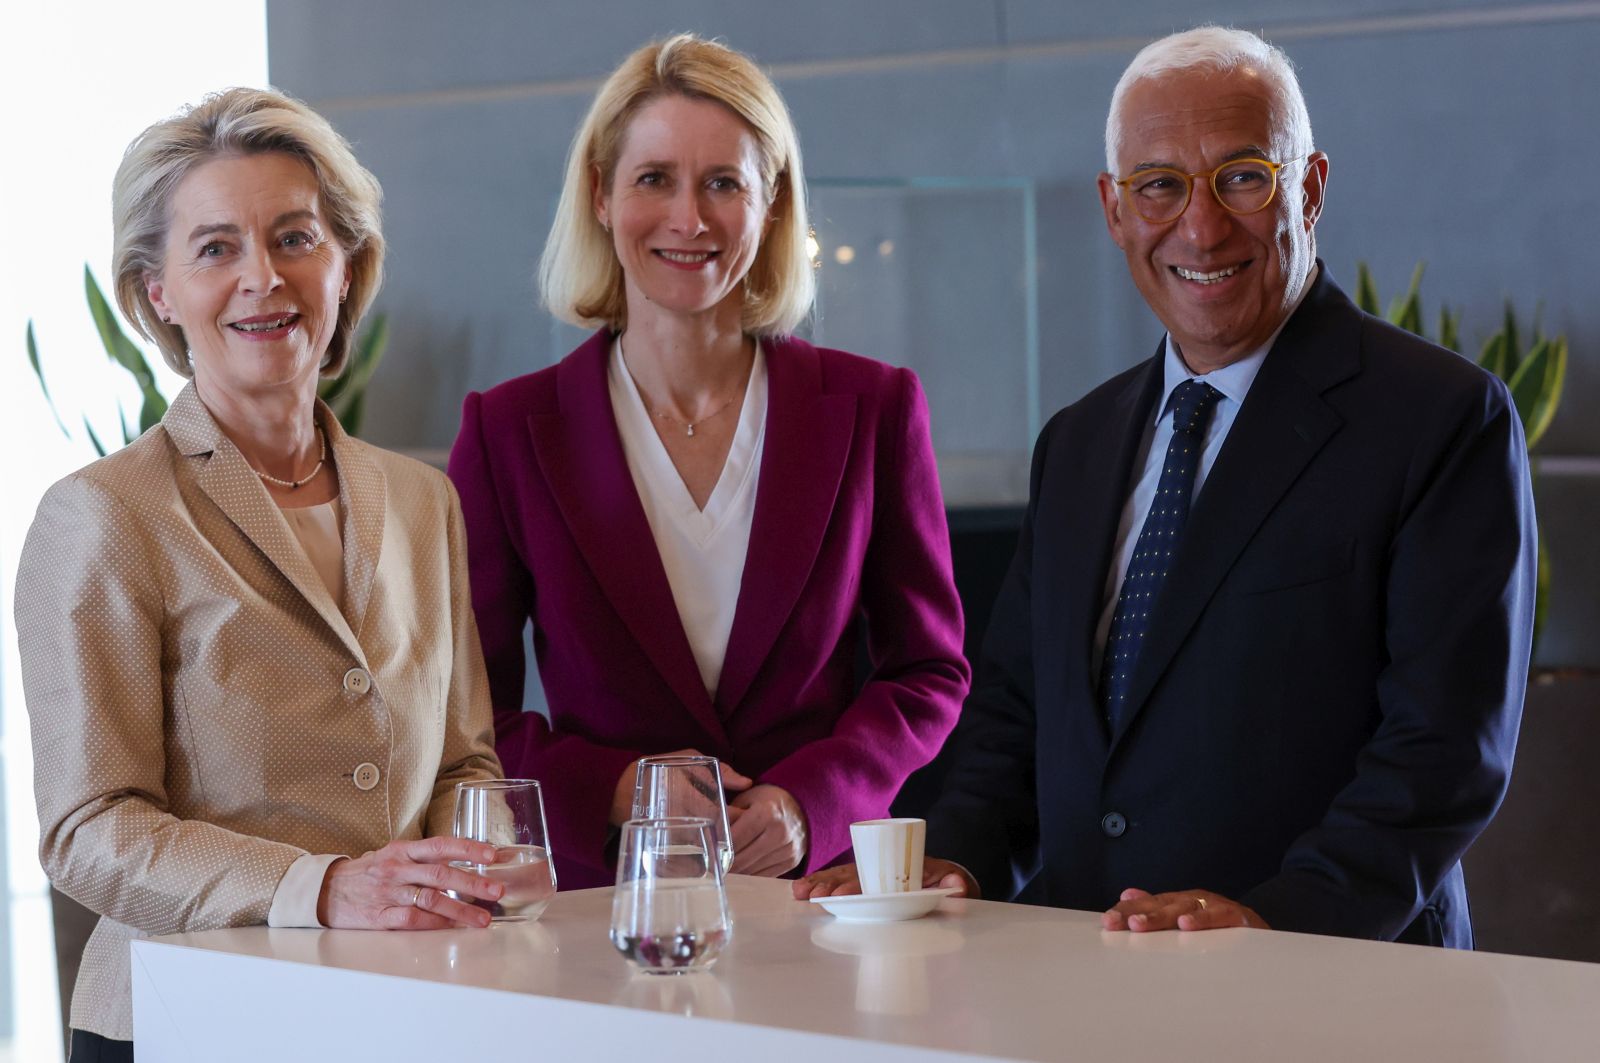 epa11443266 (L-R) European Commission President Ursula Von der Leyen, Estonian Prime Minister Kaja Kallas, and former Portuguese Prime Minister Antonio Costa, during a meeting  at Brussels Airport, a day after the EU summit in Brussels, Belgium, 28 June 2024. EU leaders agreed on proposing Ursula Von der Leyen as candidate for President of the European Commission and Kaja Kallas as High Representative of the Union for Foreign Affairs and Security Policy, while Antonio Costa was elected as European Council President during a summit to discuss the Strategic Agenda 2024-2029, the next institutional cycle, Ukraine, the Middle East, competitiveness, security and defense, among other topics.  EPA/OLIVIER HOSLET / POOL